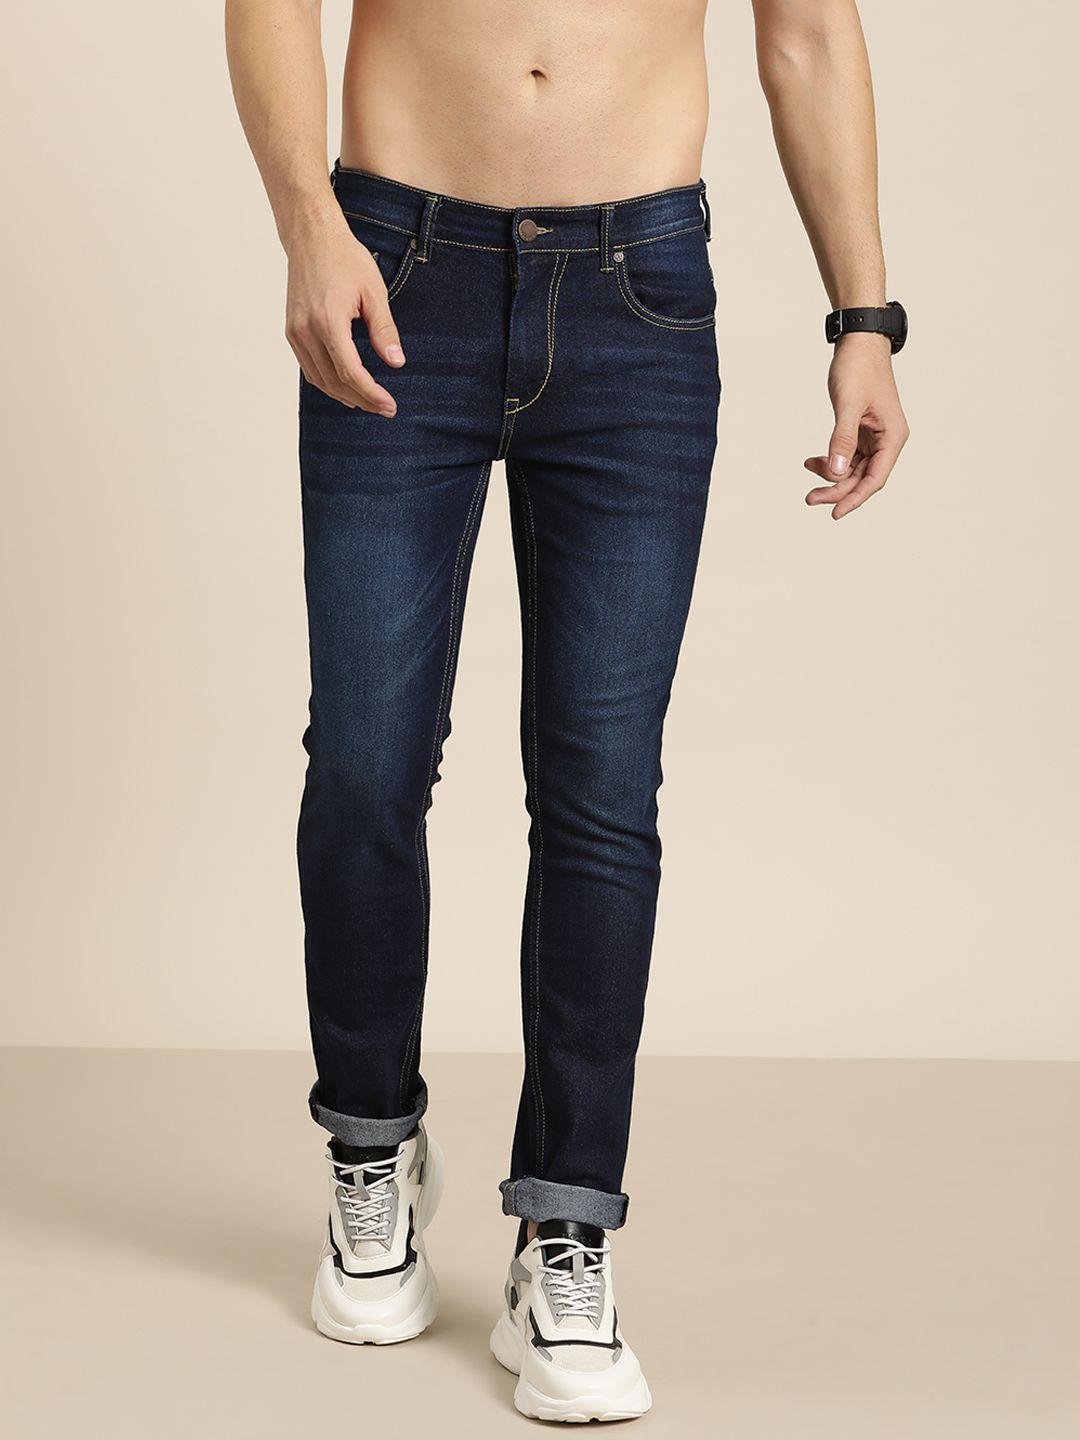 here&now men skinny fit light fade jeans